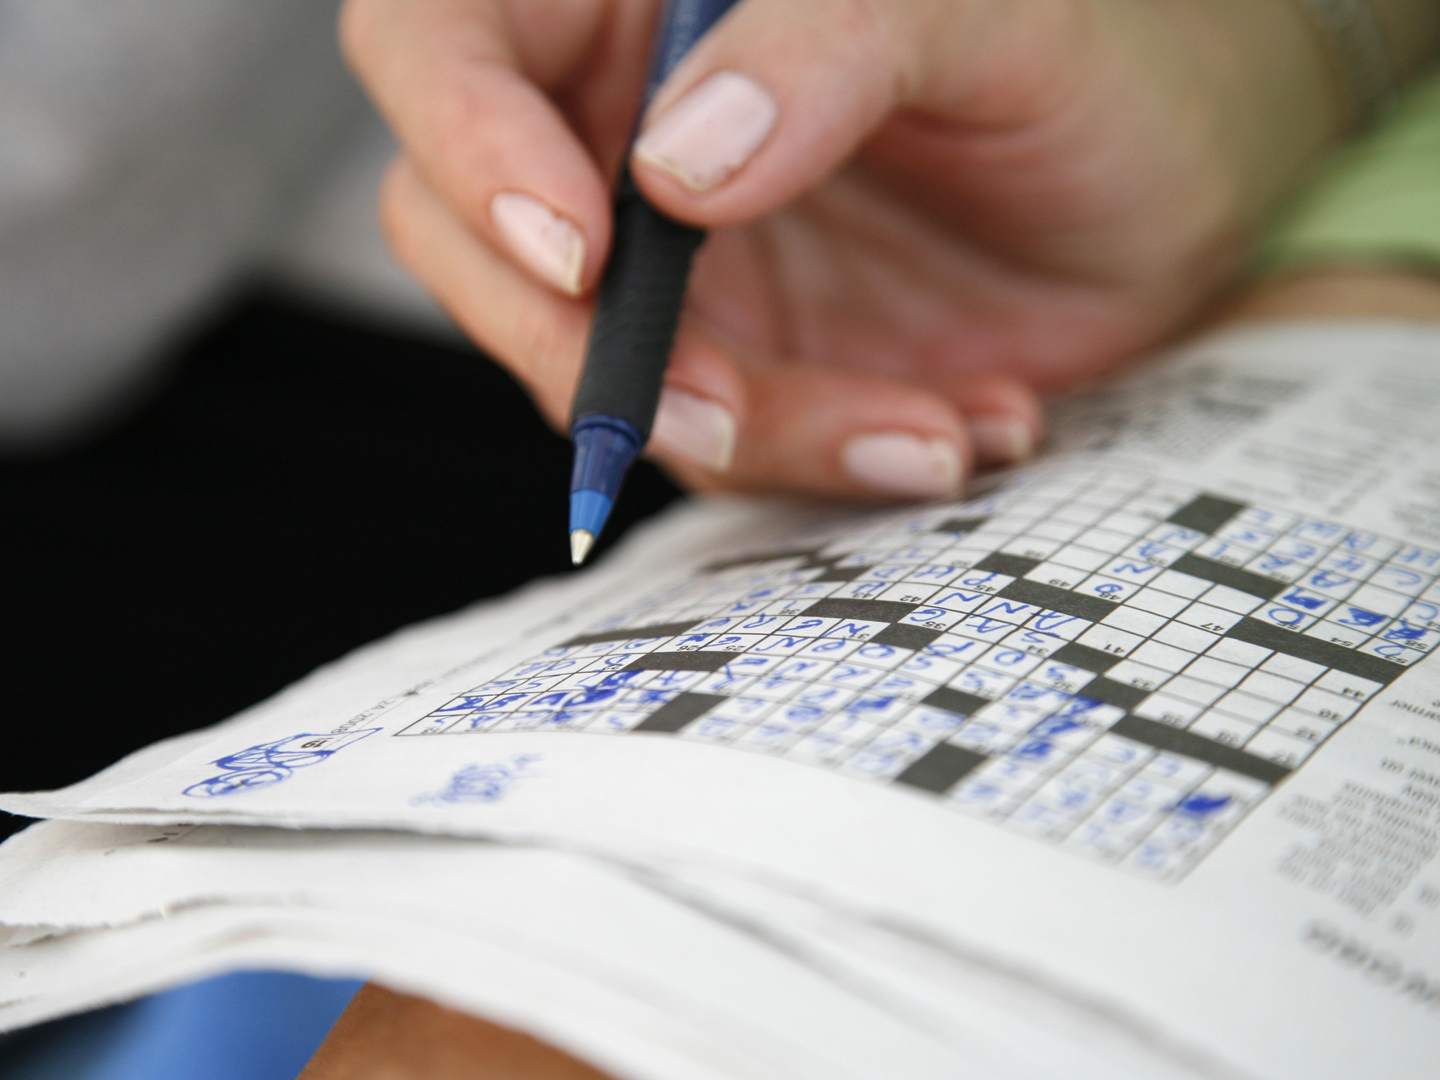 Working on a crossword puzzle.